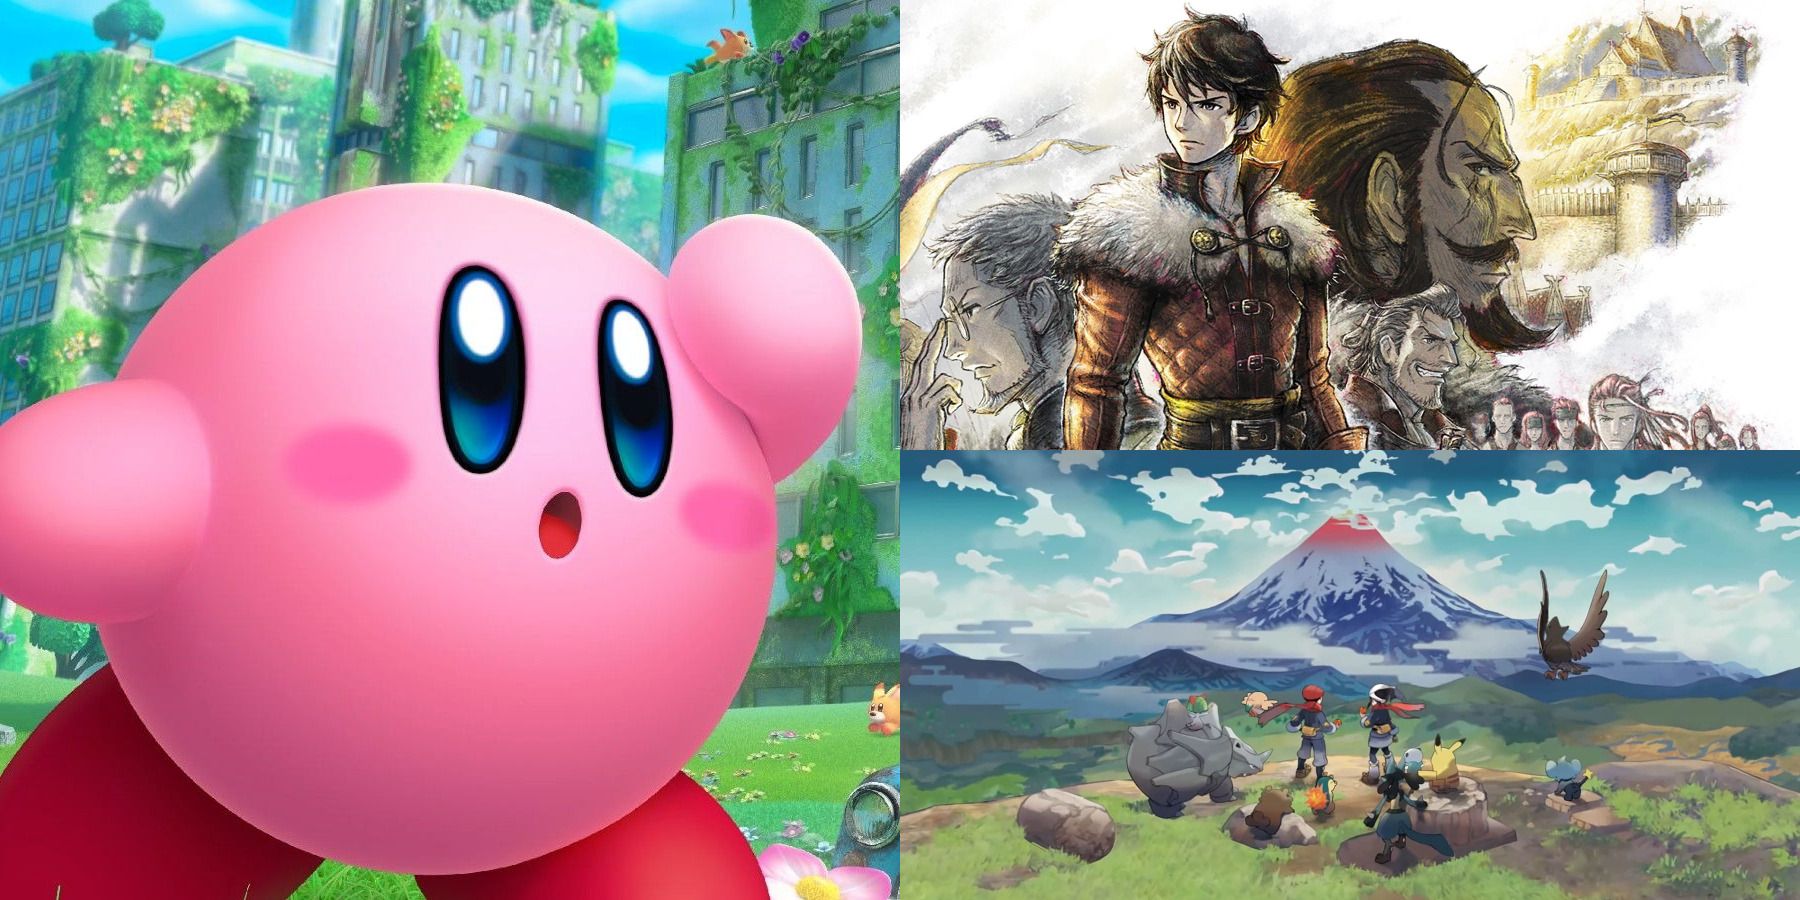 2022 Nintendo Switch Exclusives Cover Kirby, Triangle Strategy & Pokemon Legends